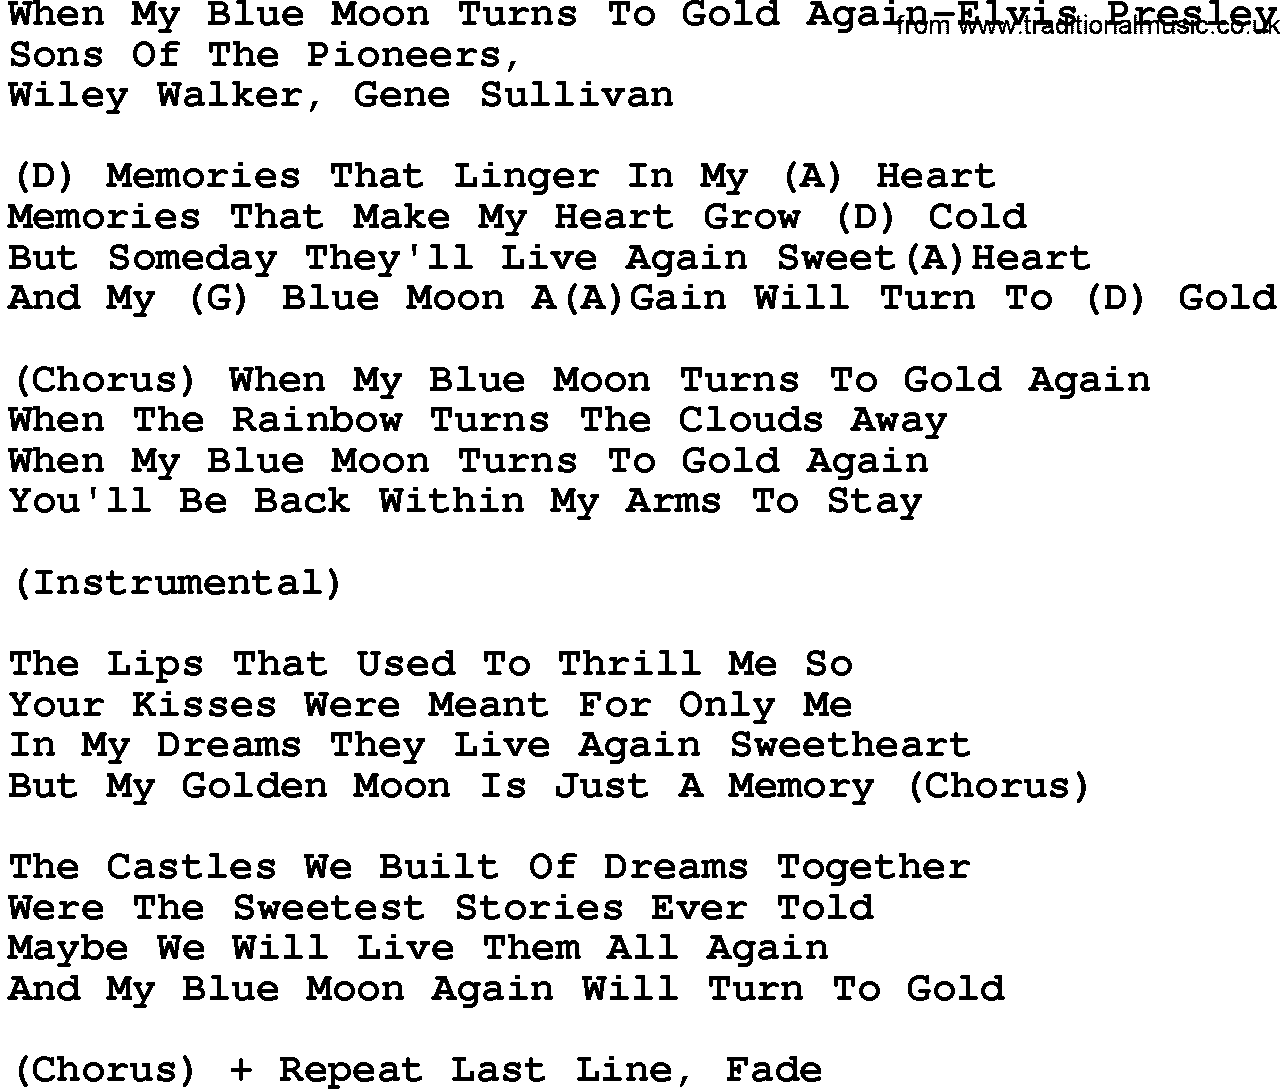 Country music song: When My Blue Moon Turns To Gold Again-Elvis Presley lyrics and chords